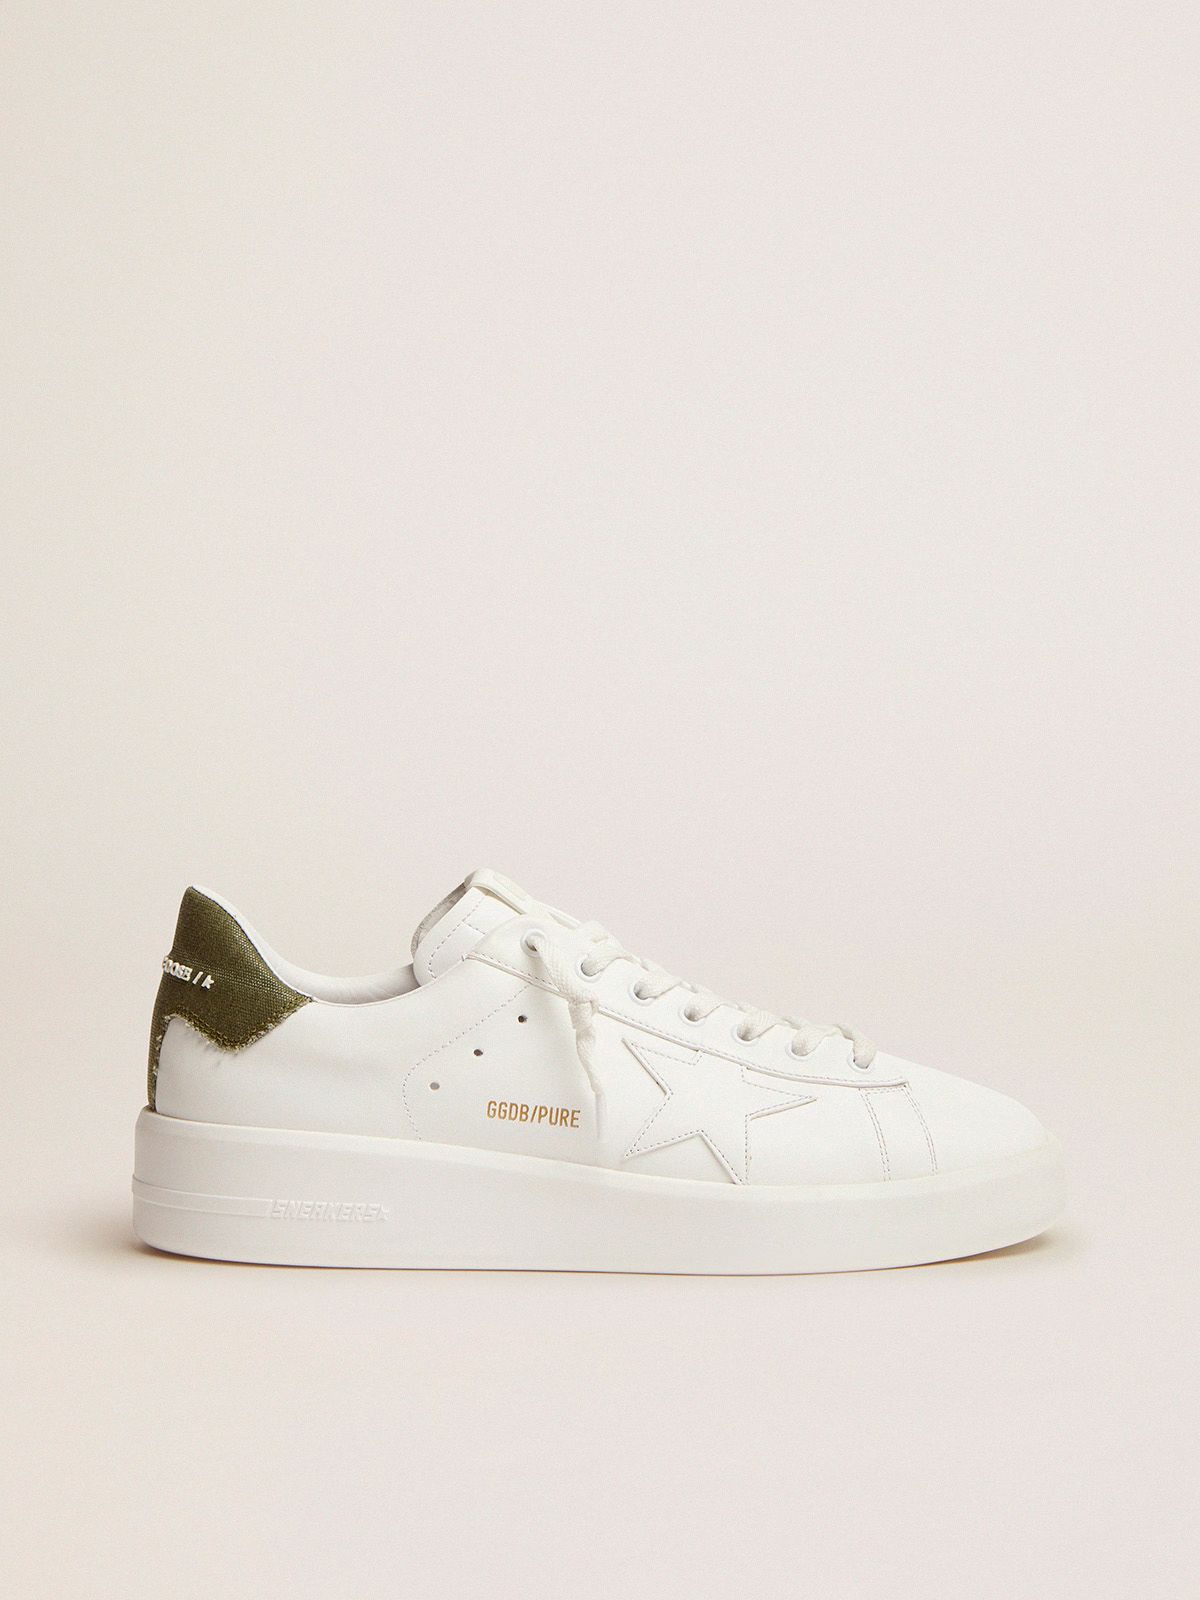 Golden Goose Sconti Uomo Purestar sneakers in white leather with green canvas heel tab